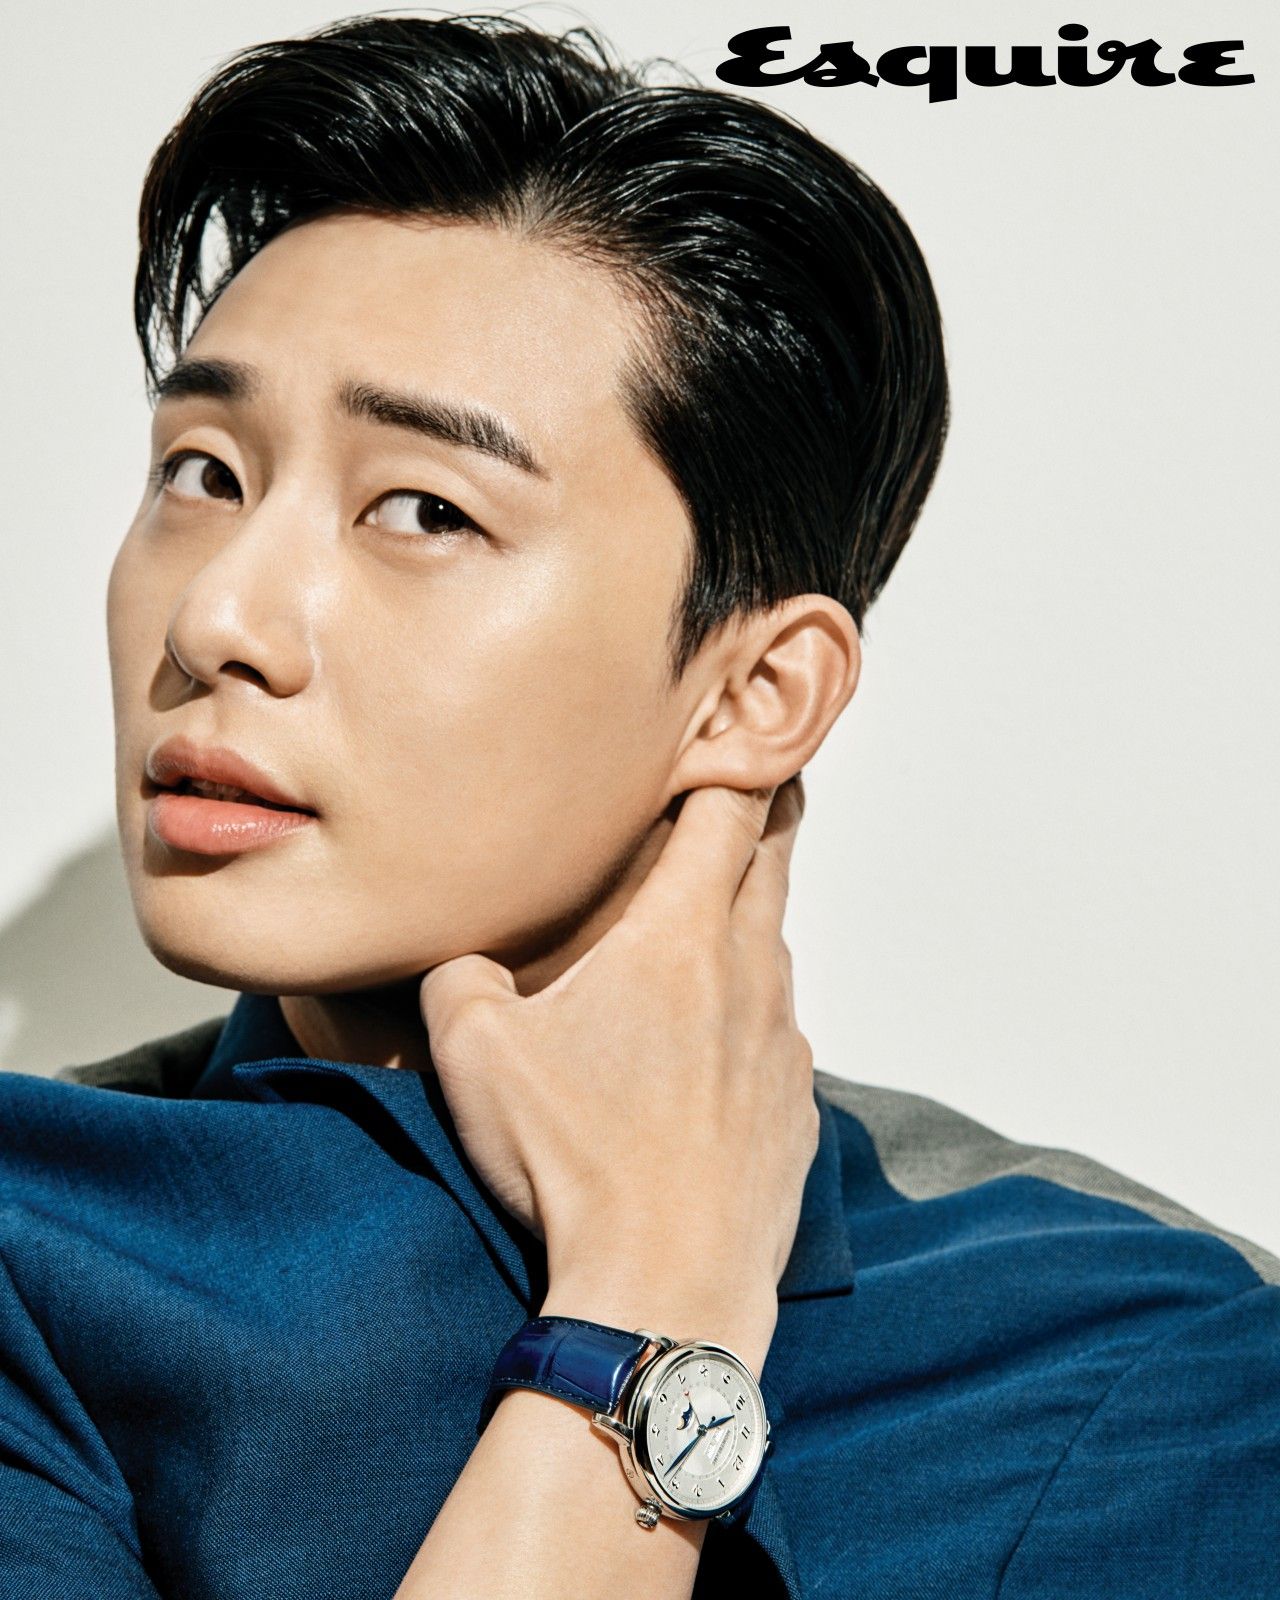 Android Park Seo Joon Wallpapers - Wallpaper Cave